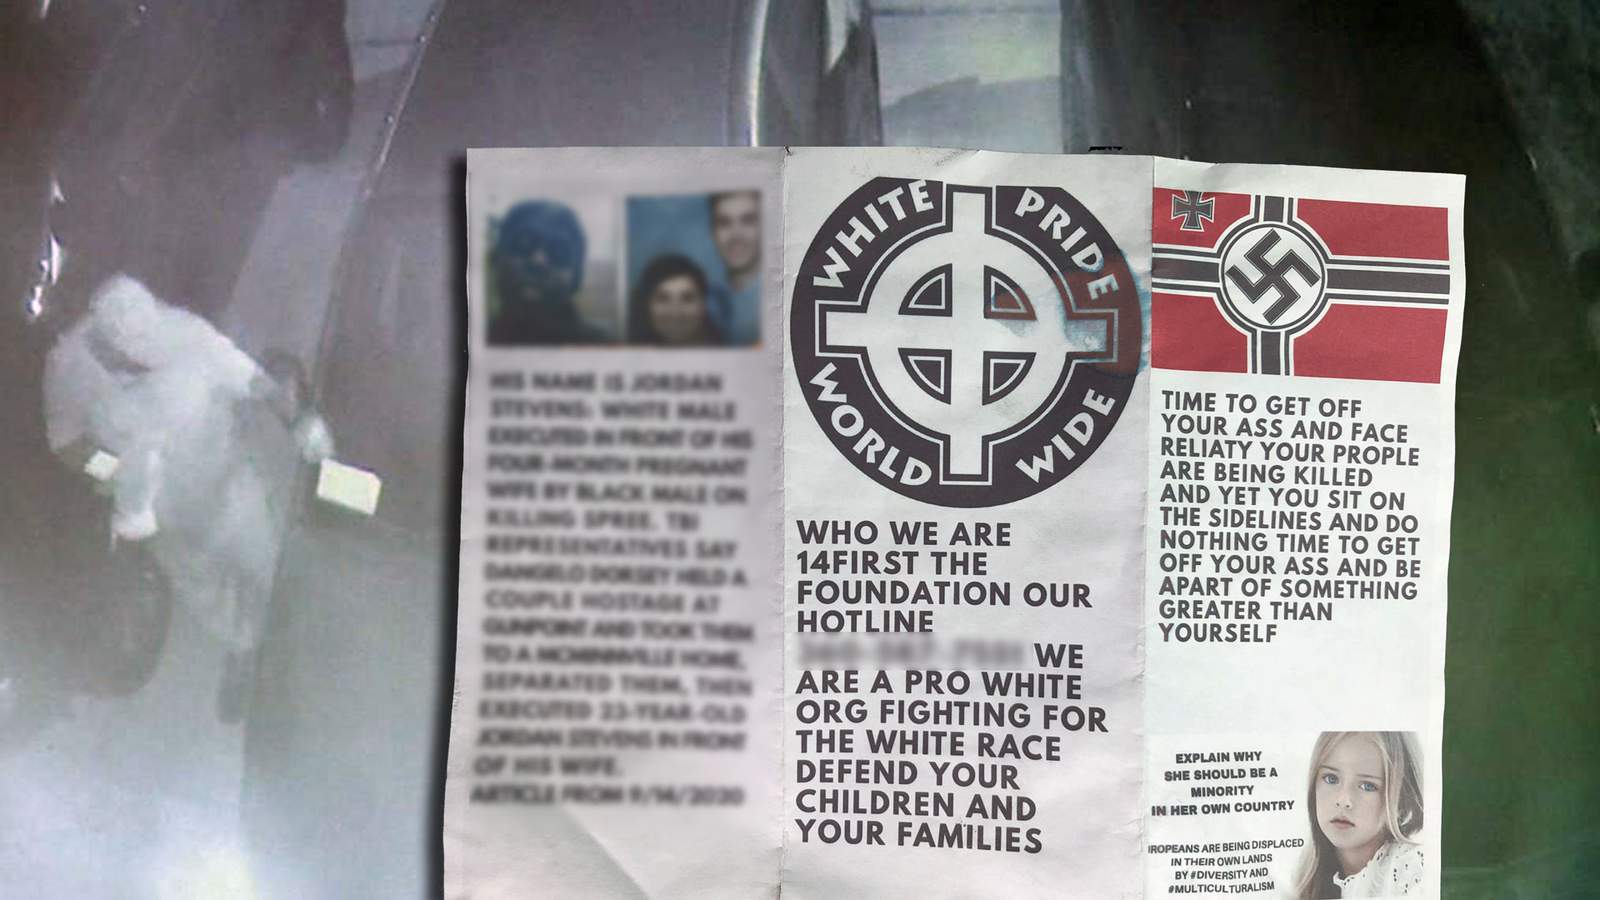 Middleburg neighbors wake up to find racist flyers on their cars